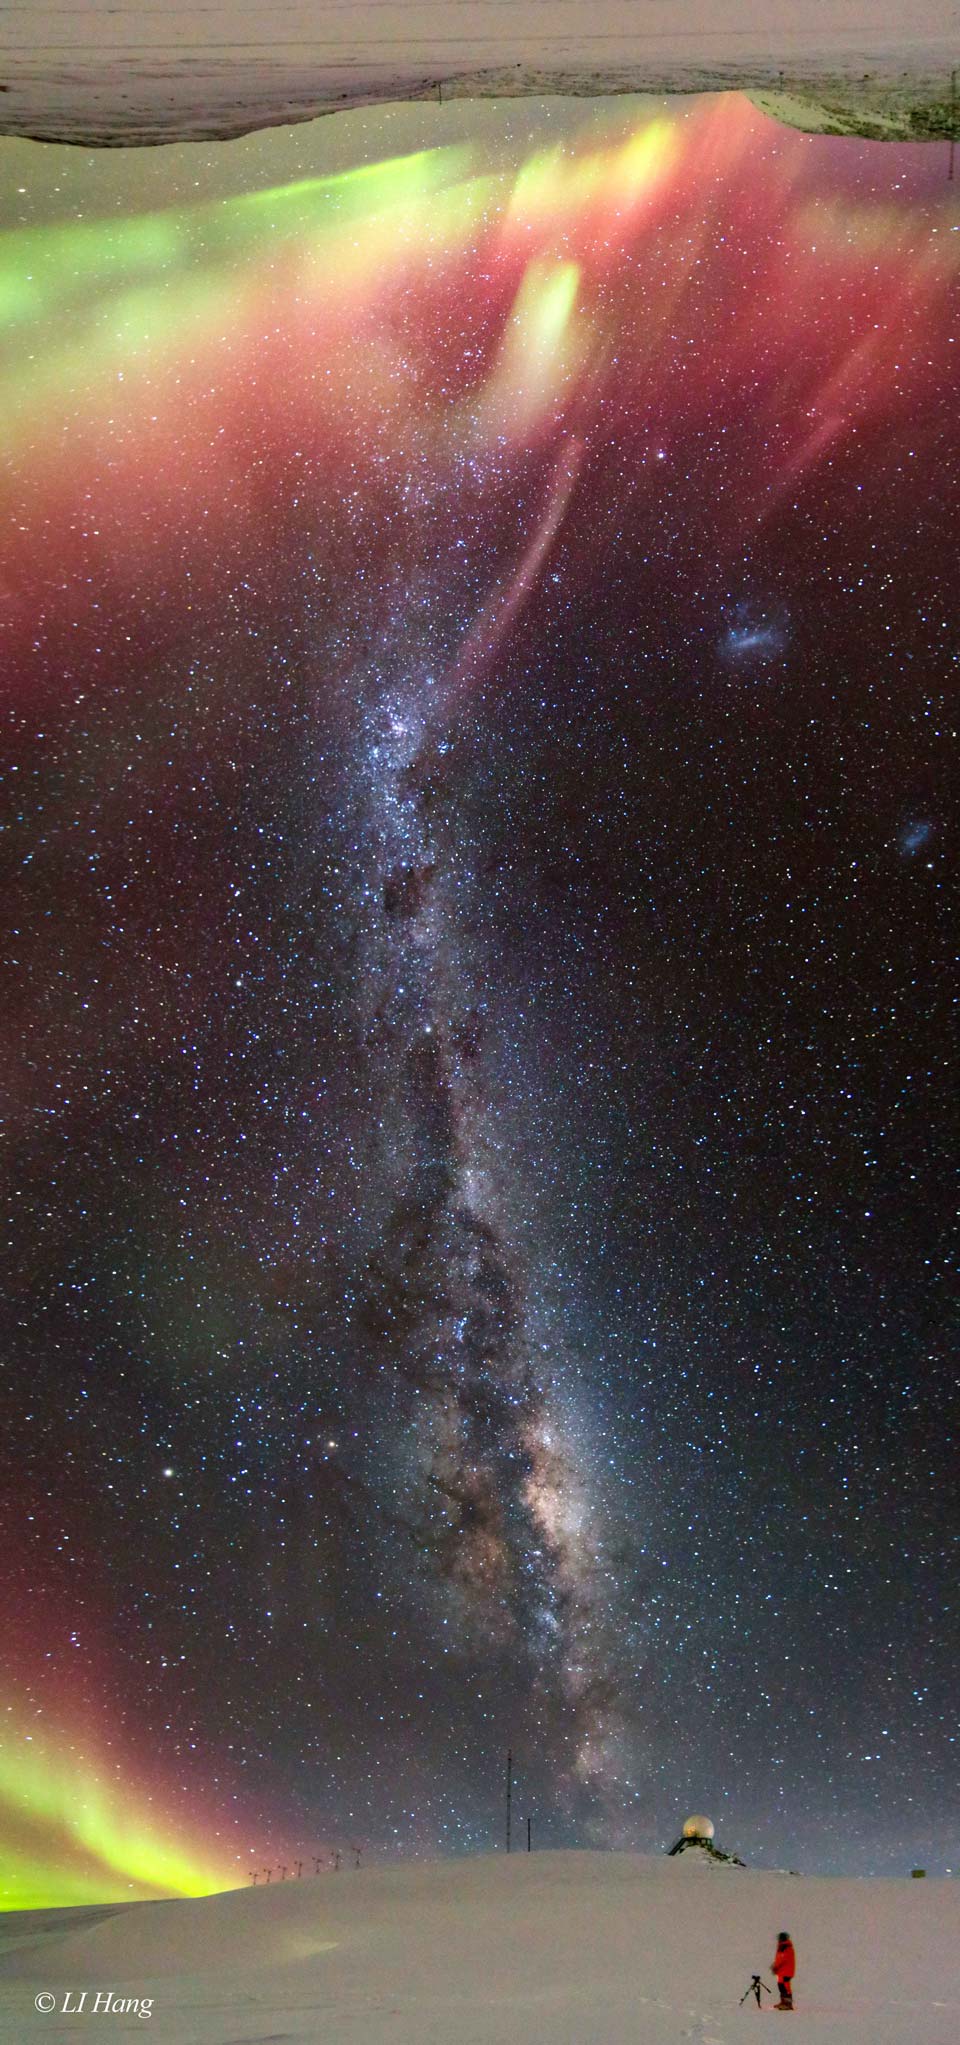 A long vertical image shows a band of the night sky from
horizon at the bottom to the opposite horizon -- at the image top.
A person stands on a snow covered landscape with the central
band of the Milky Way running between horizons. Each horizon
is lit by red, yellow, and green aurorae.
Please see the explanation for more detailed information.